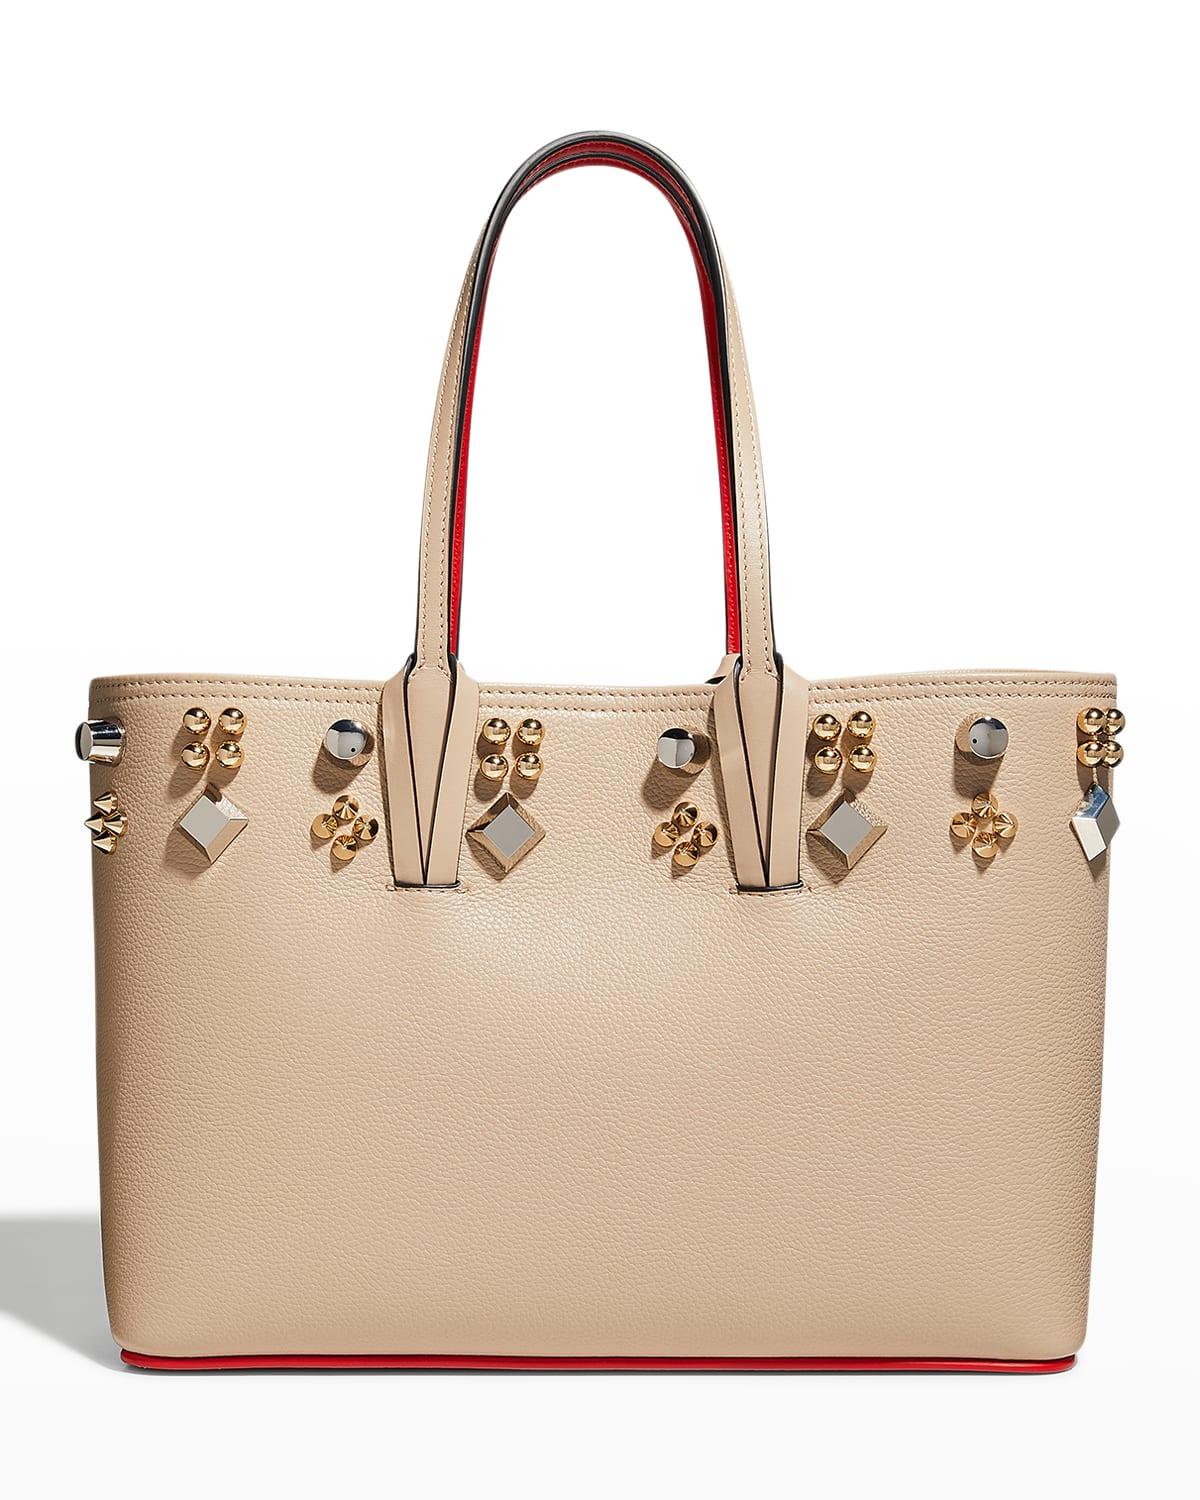 Christian Louboutin Cabata Small Empire Spikes Leather Tote Bag in ...